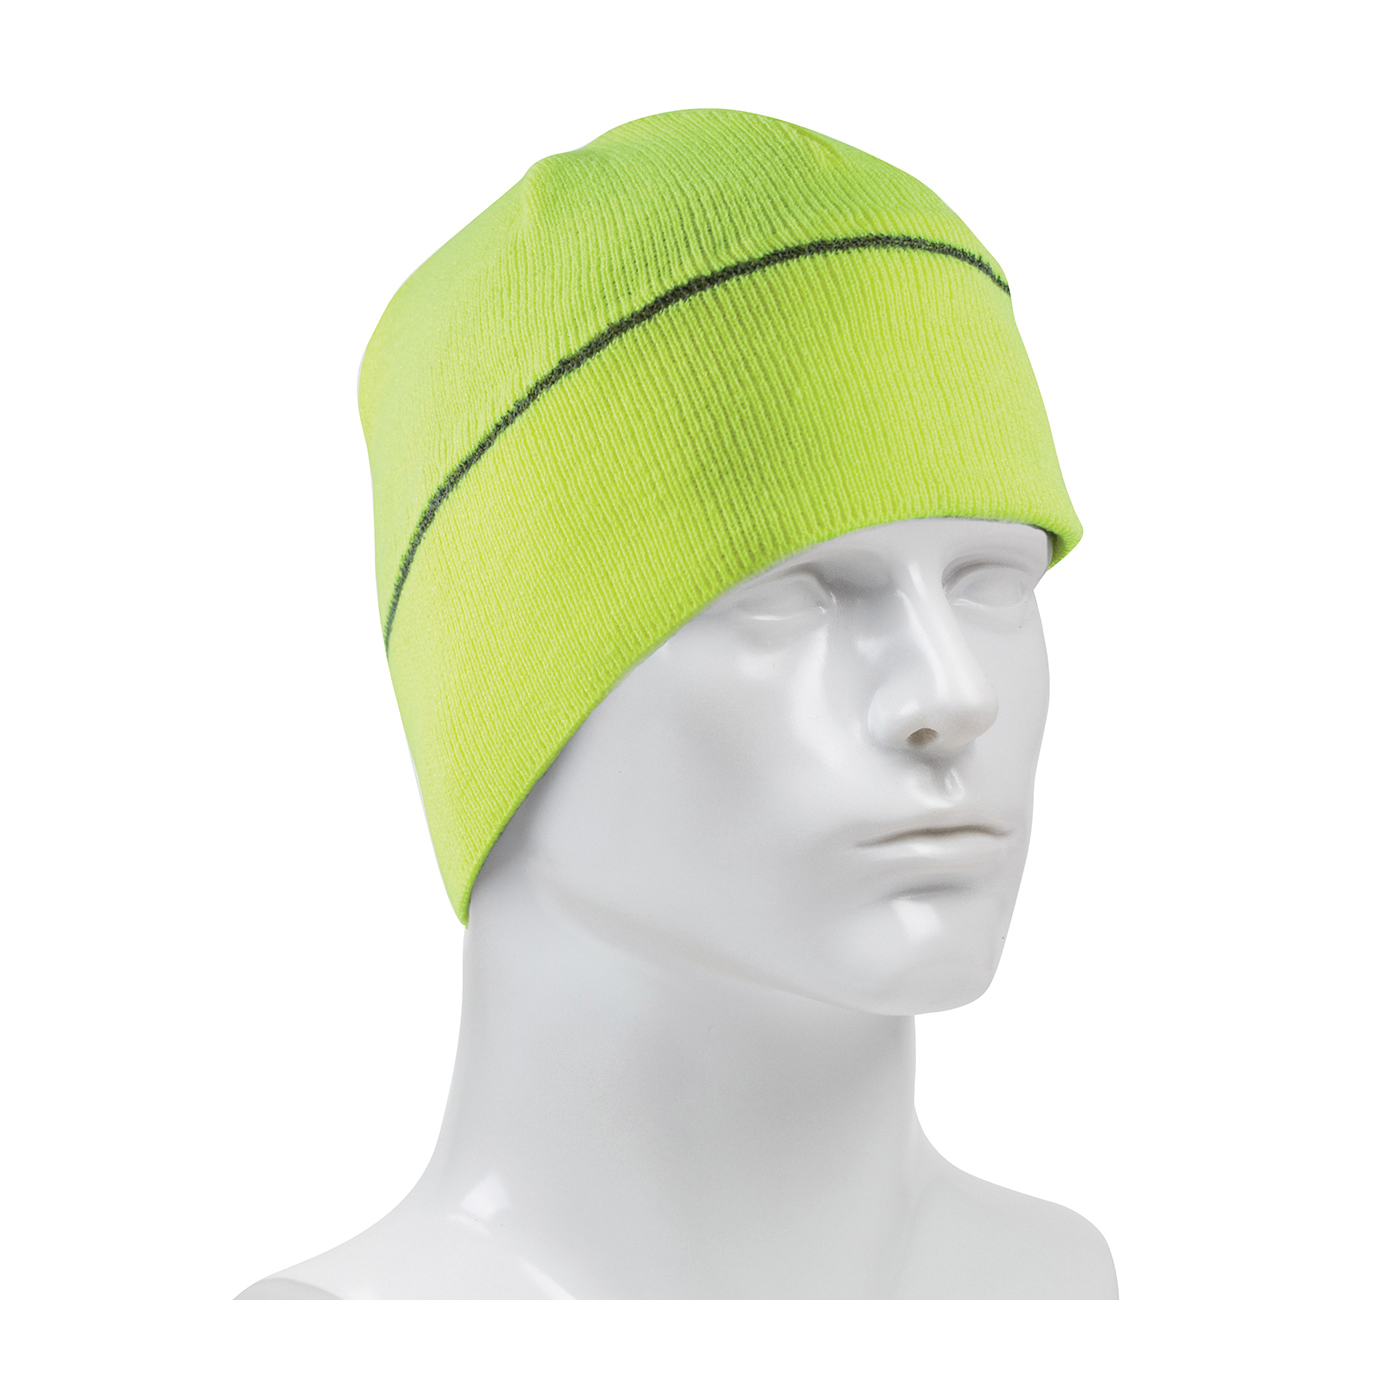 PIP® 360-BEANNIELY Winter Beanie Cap With Reflective Stripe, OS, Hi-Viz Lime Yellow, Polyester